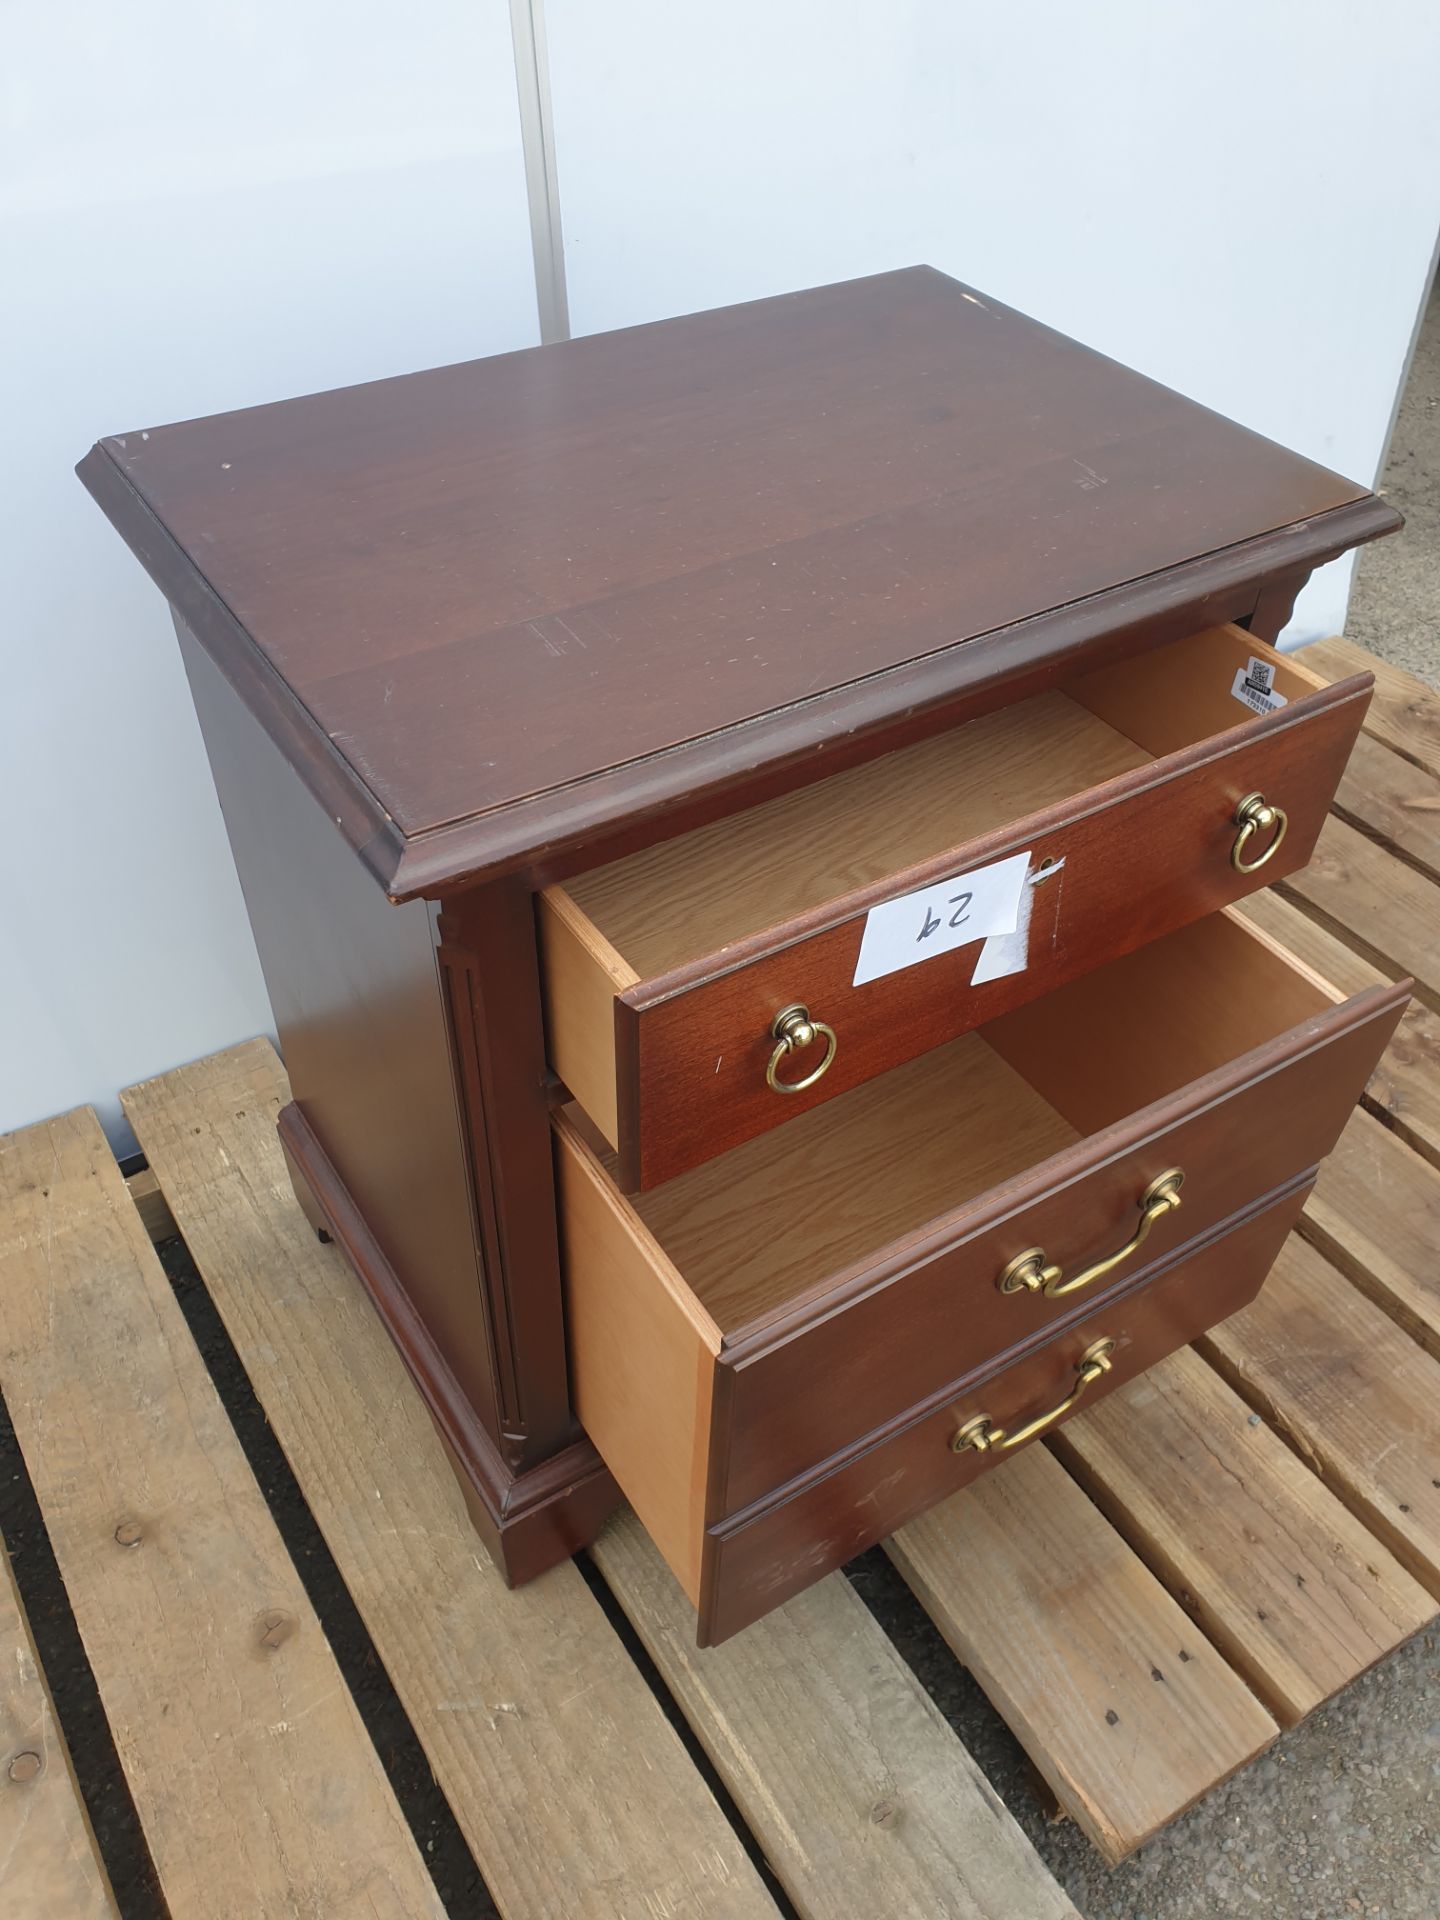 No VAT Cherrywood Two Drawer Cabinet - Image 2 of 3